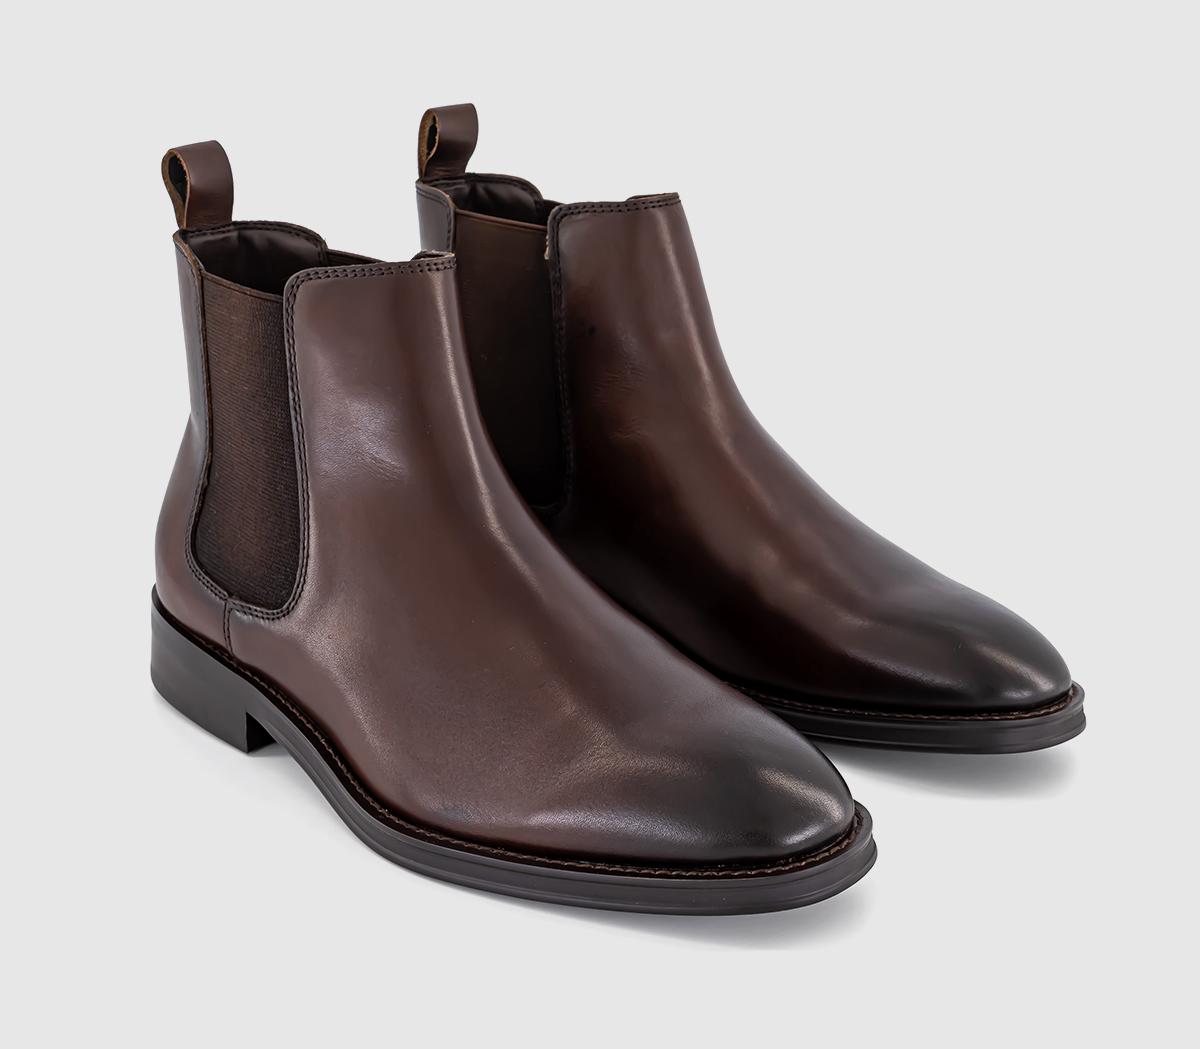 OFFICE Mens Blenheim Chelsea Boots Brown Leather, 7